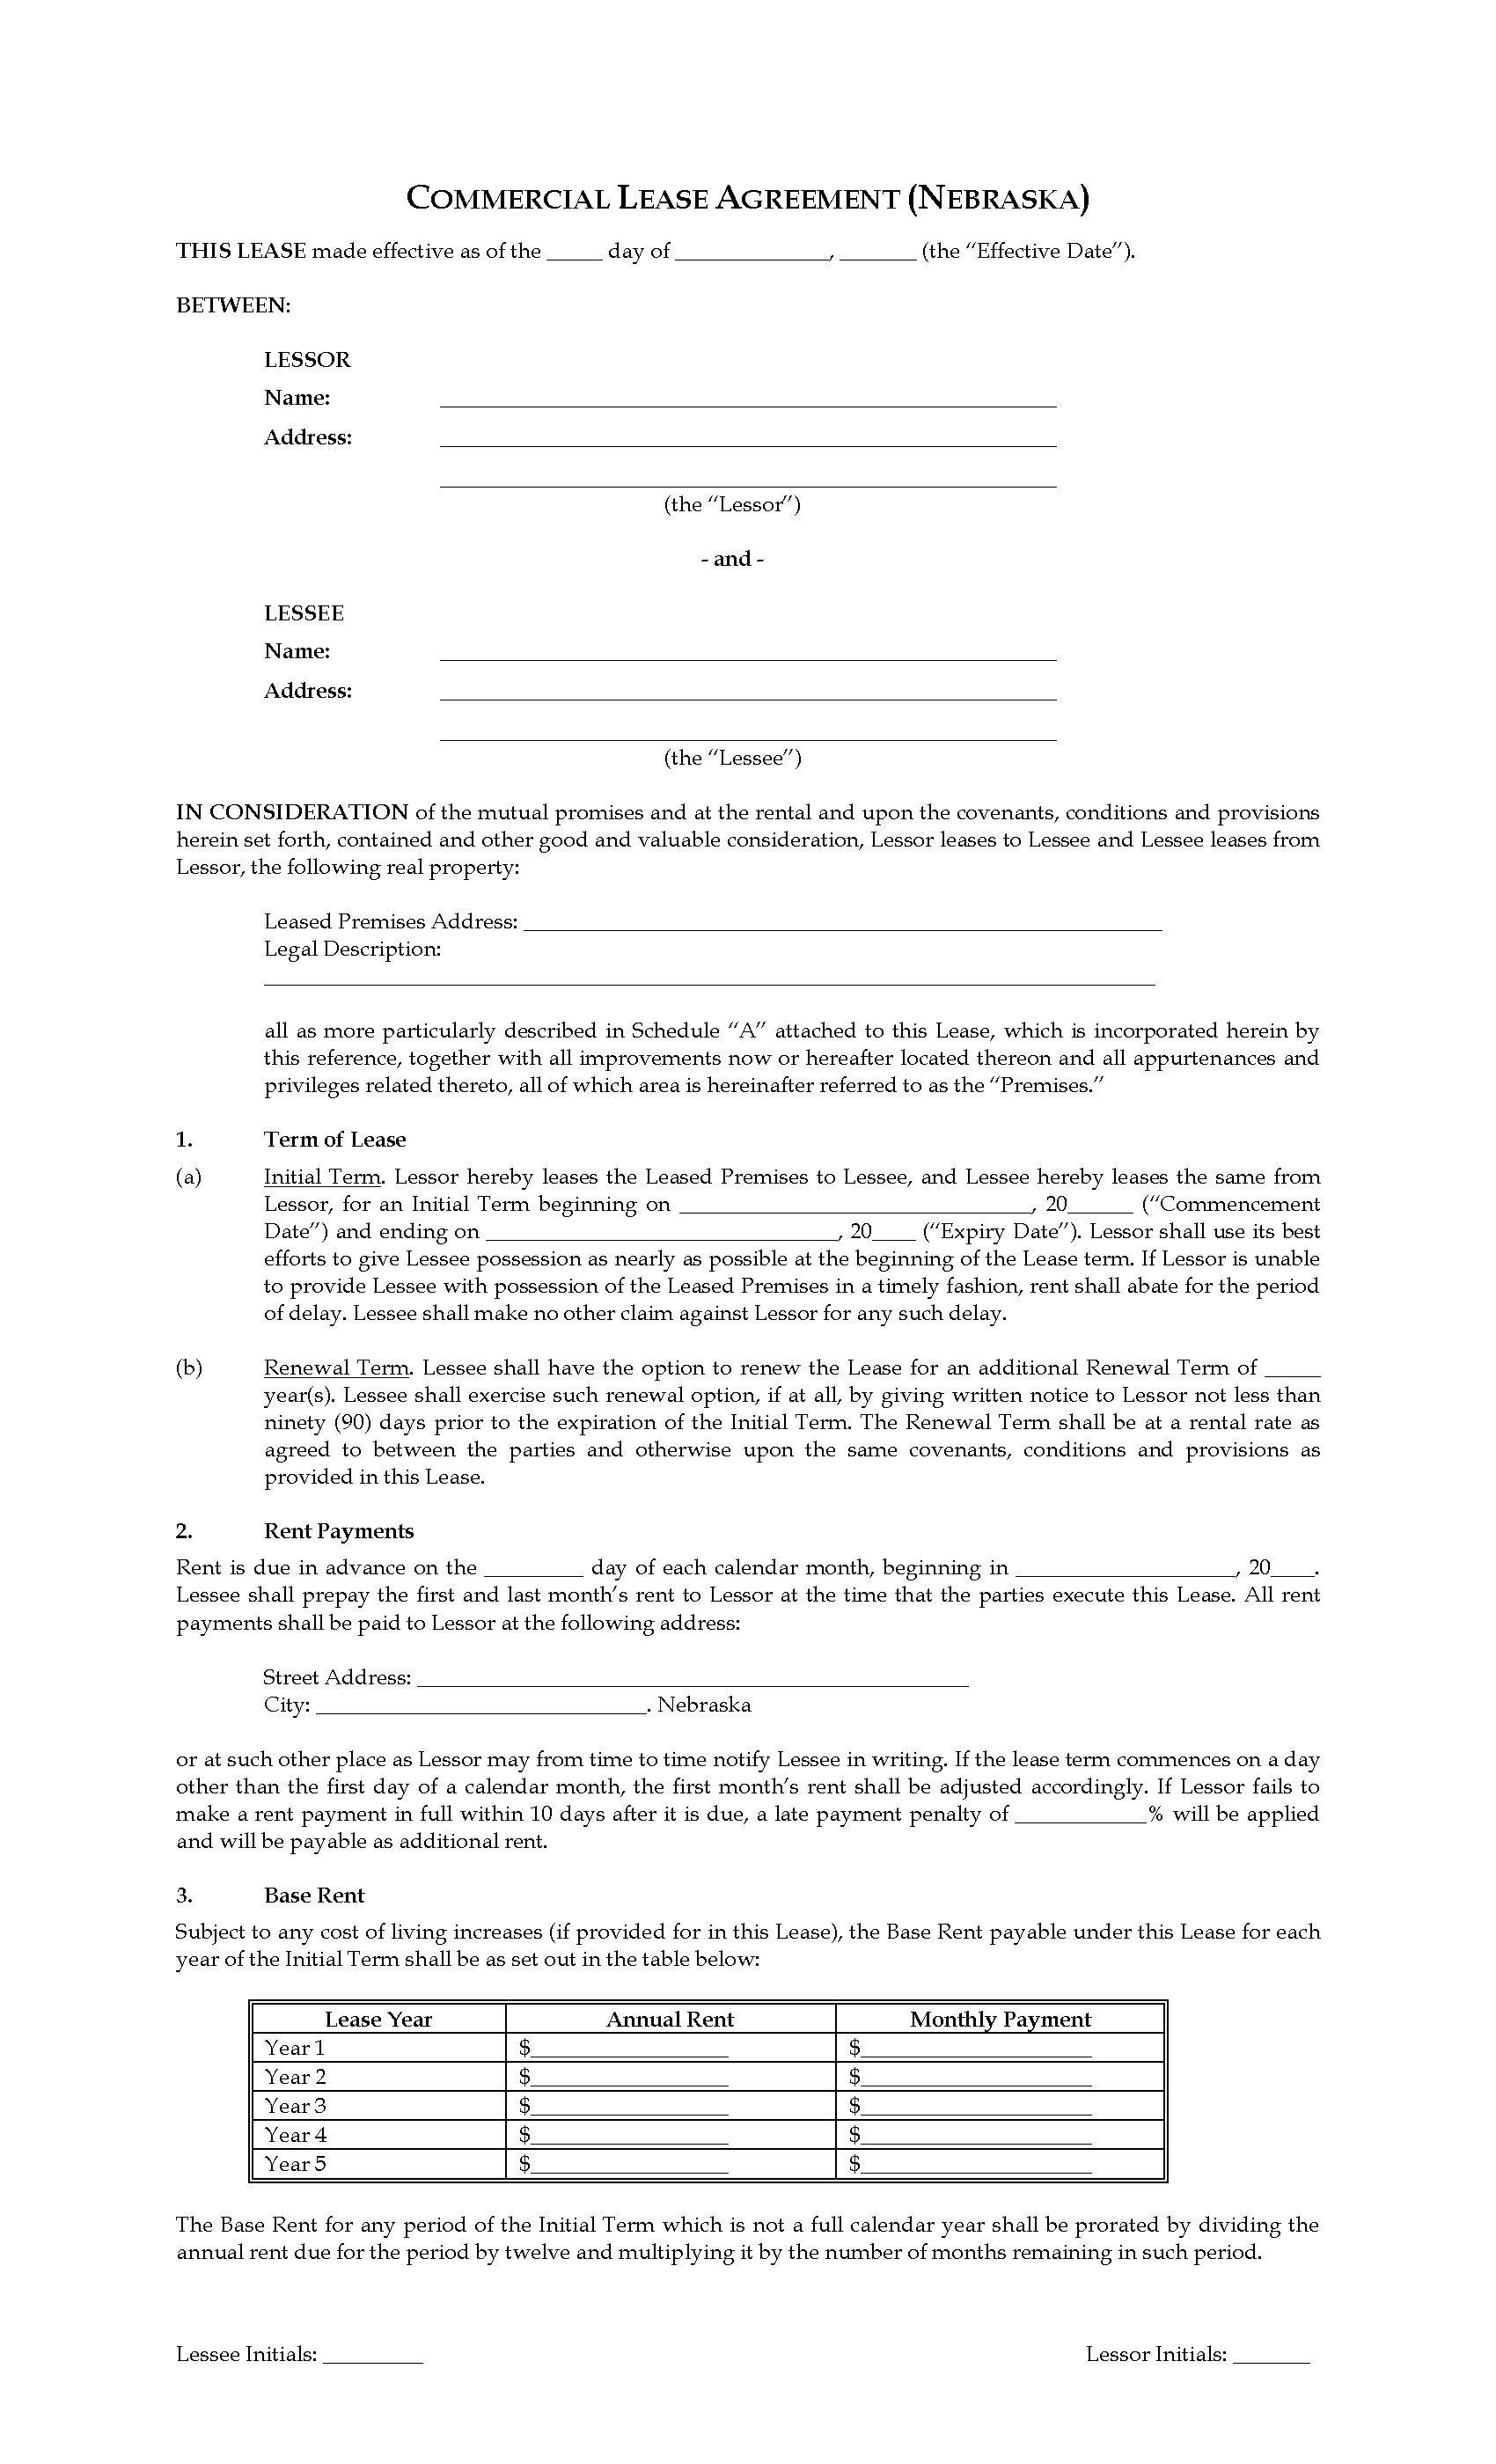 Wisconsin Waiver Of Lien On Partial Payment Public Works Legal Forms And Business Templates Megadox Com